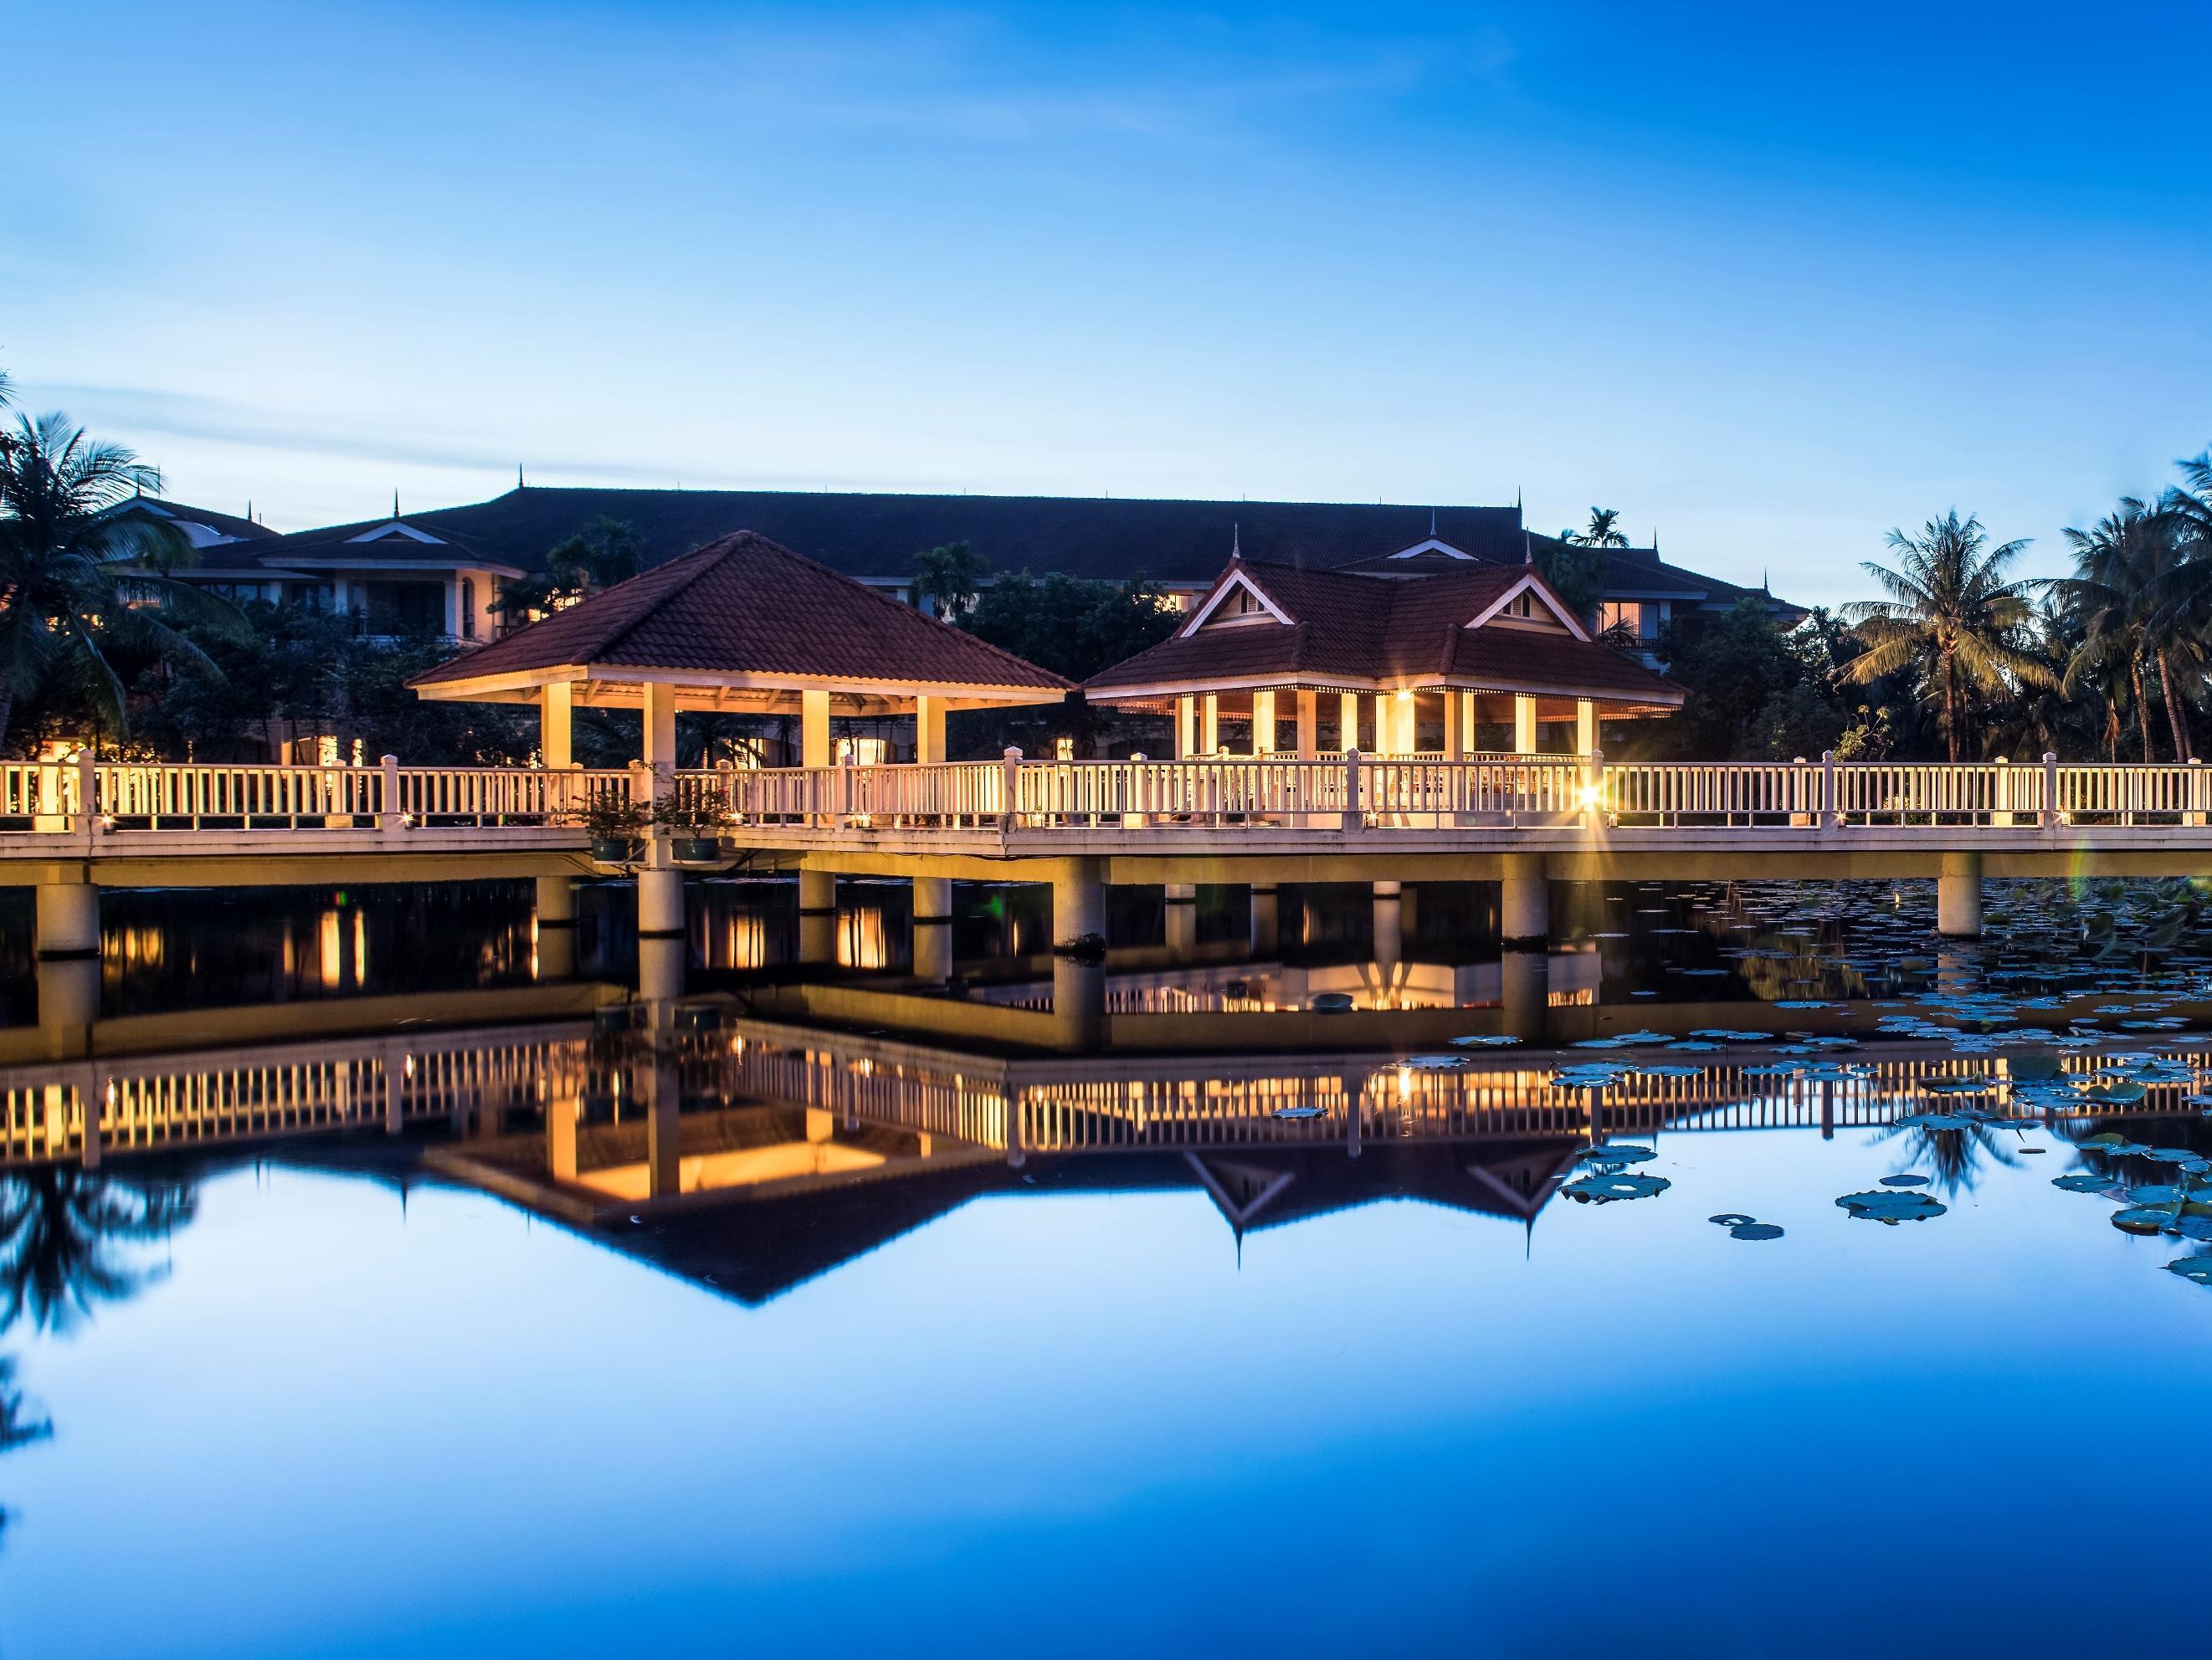 Sofitel Angkor Phokeethra Golf & Spa Resort Siem Reap Province FAQ 2017, What facilities are there in Sofitel Angkor Phokeethra Golf & Spa Resort Siem Reap Province 2017, What Languages Spoken are Supported in Sofitel Angkor Phokeethra Golf & Spa Resort Siem Reap Province 2017, Which payment cards are accepted in Sofitel Angkor Phokeethra Golf & Spa Resort Siem Reap Province , Siem Reap Province Sofitel Angkor Phokeethra Golf & Spa Resort room facilities and services Q&A 2017, Siem Reap Province Sofitel Angkor Phokeethra Golf & Spa Resort online booking services 2017, Siem Reap Province Sofitel Angkor Phokeethra Golf & Spa Resort address 2017, Siem Reap Province Sofitel Angkor Phokeethra Golf & Spa Resort telephone number 2017,Siem Reap Province Sofitel Angkor Phokeethra Golf & Spa Resort map 2017, Siem Reap Province Sofitel Angkor Phokeethra Golf & Spa Resort traffic guide 2017, how to go Siem Reap Province Sofitel Angkor Phokeethra Golf & Spa Resort, Siem Reap Province Sofitel Angkor Phokeethra Golf & Spa Resort booking online 2017, Siem Reap Province Sofitel Angkor Phokeethra Golf & Spa Resort room types 2017.